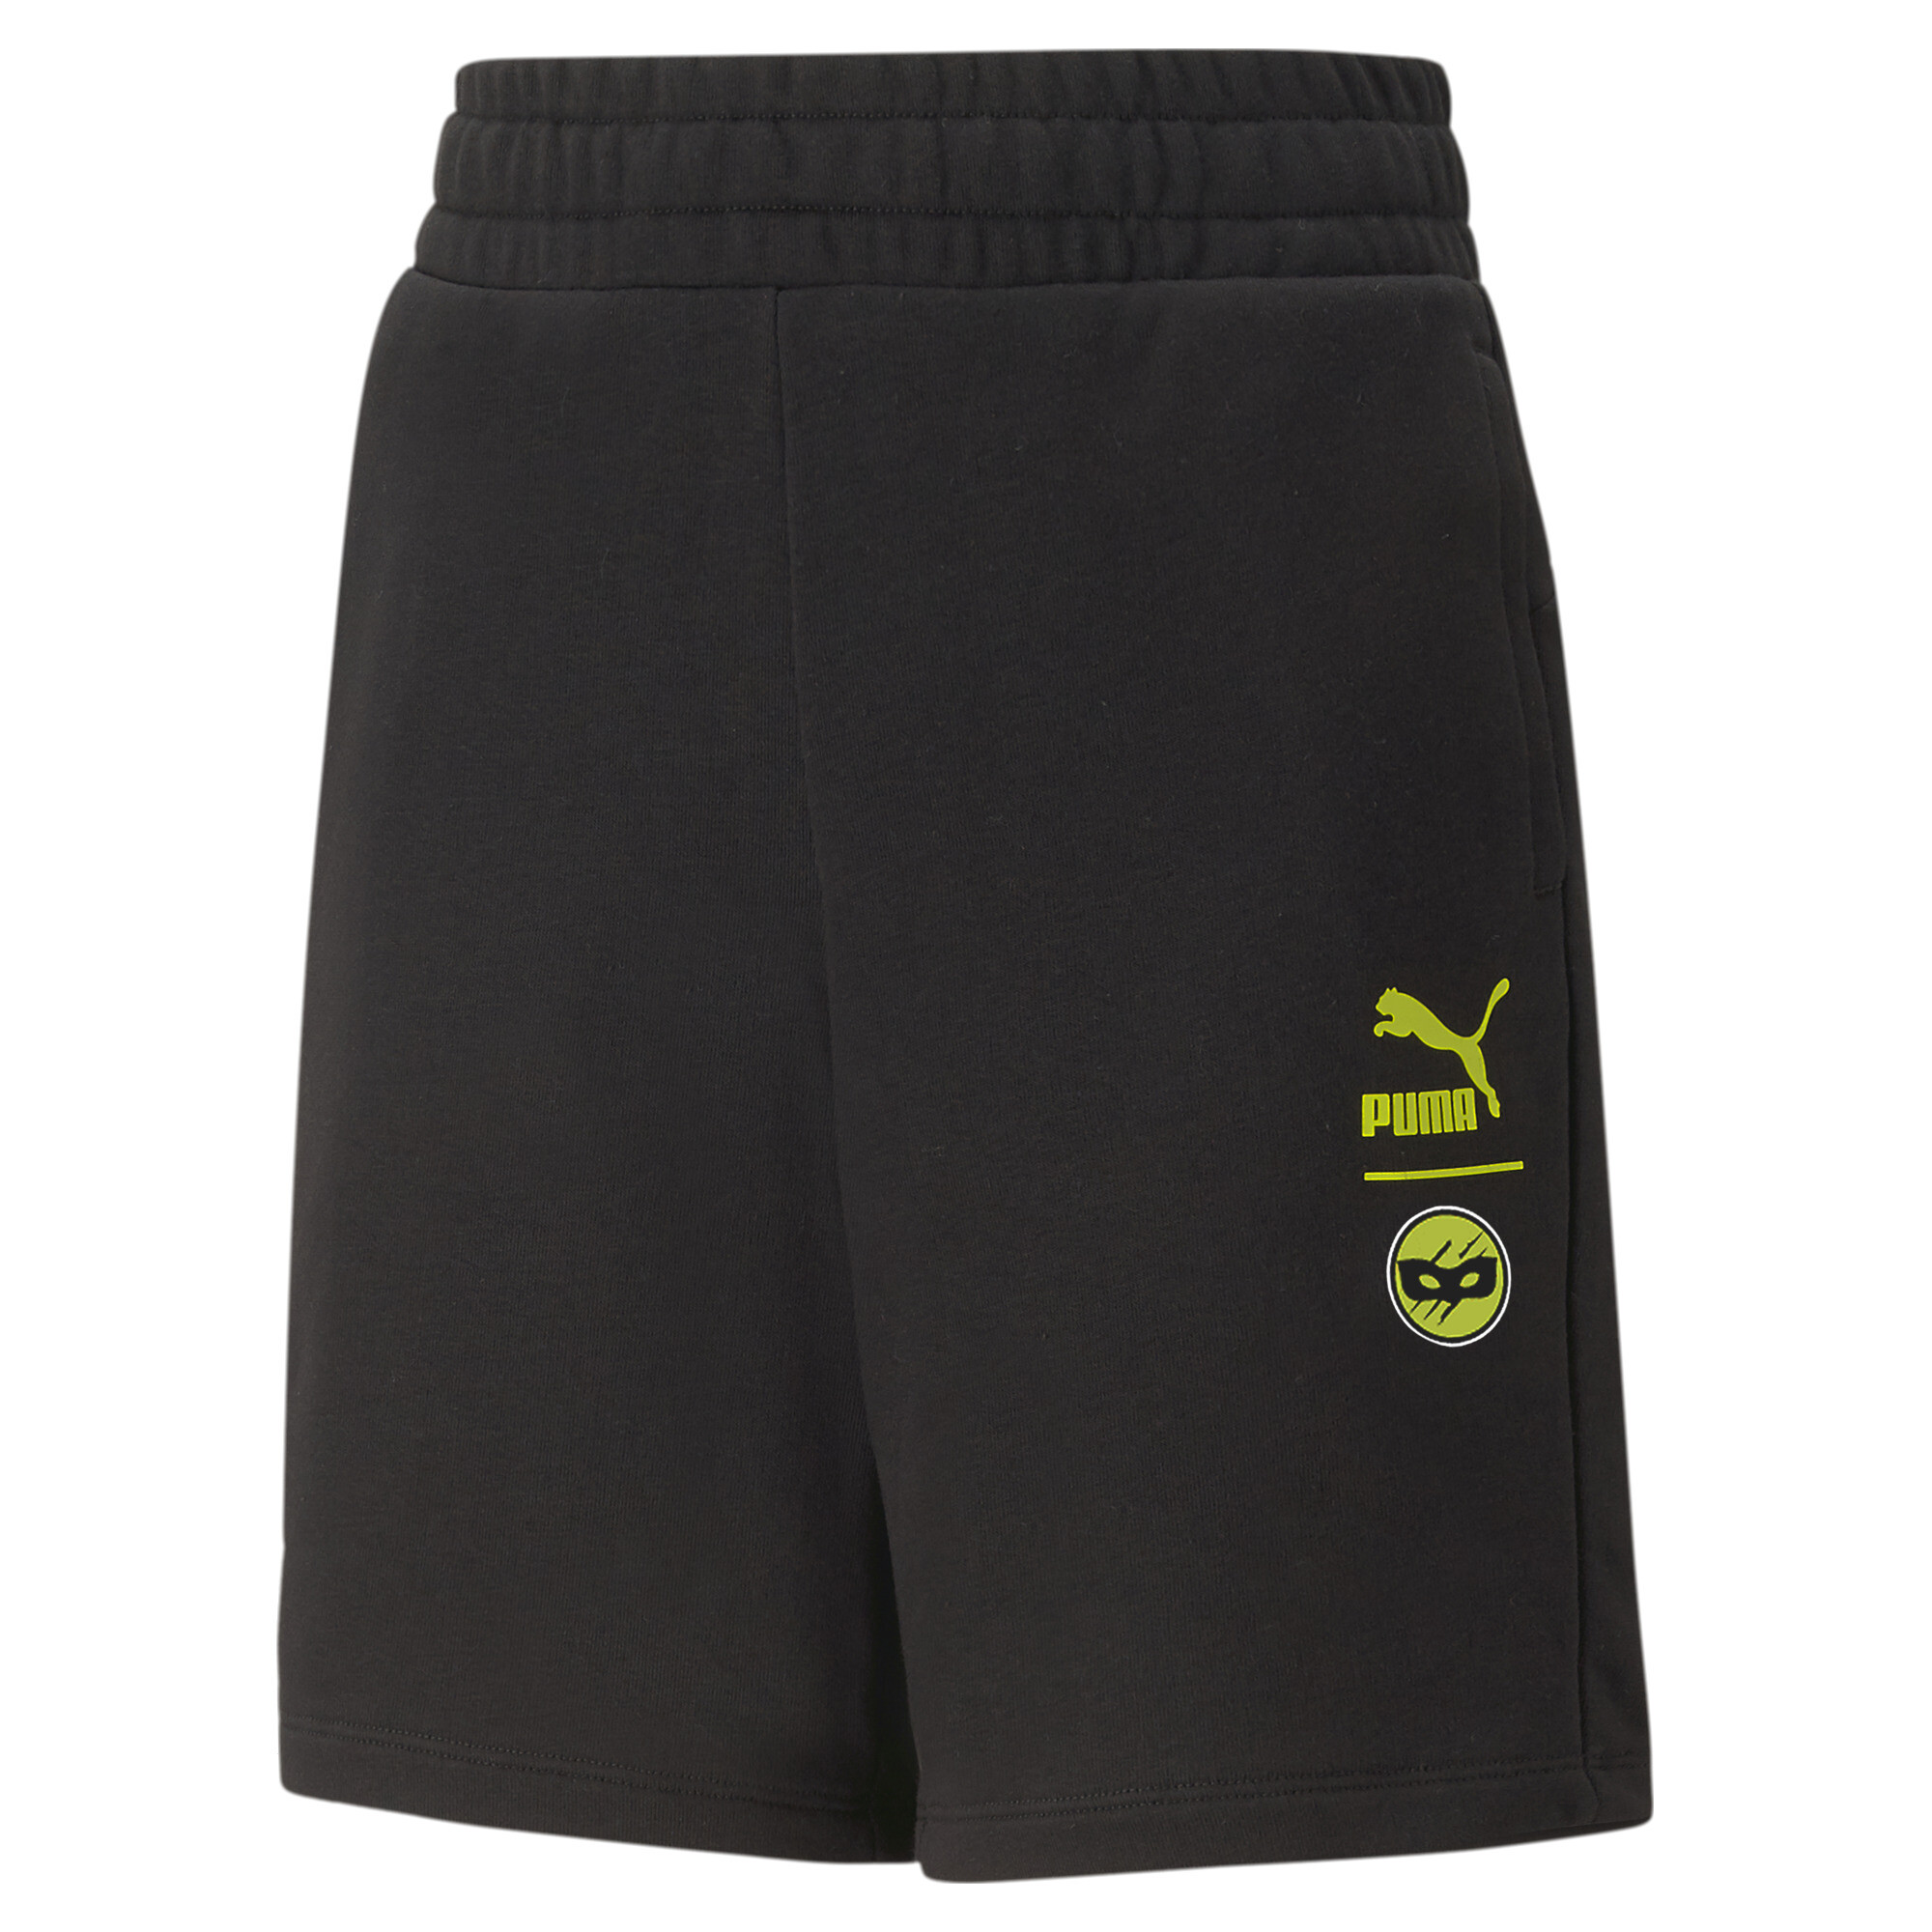 PUMA X MIRACULOUS Shorts In Black, Size 7-8 Youth